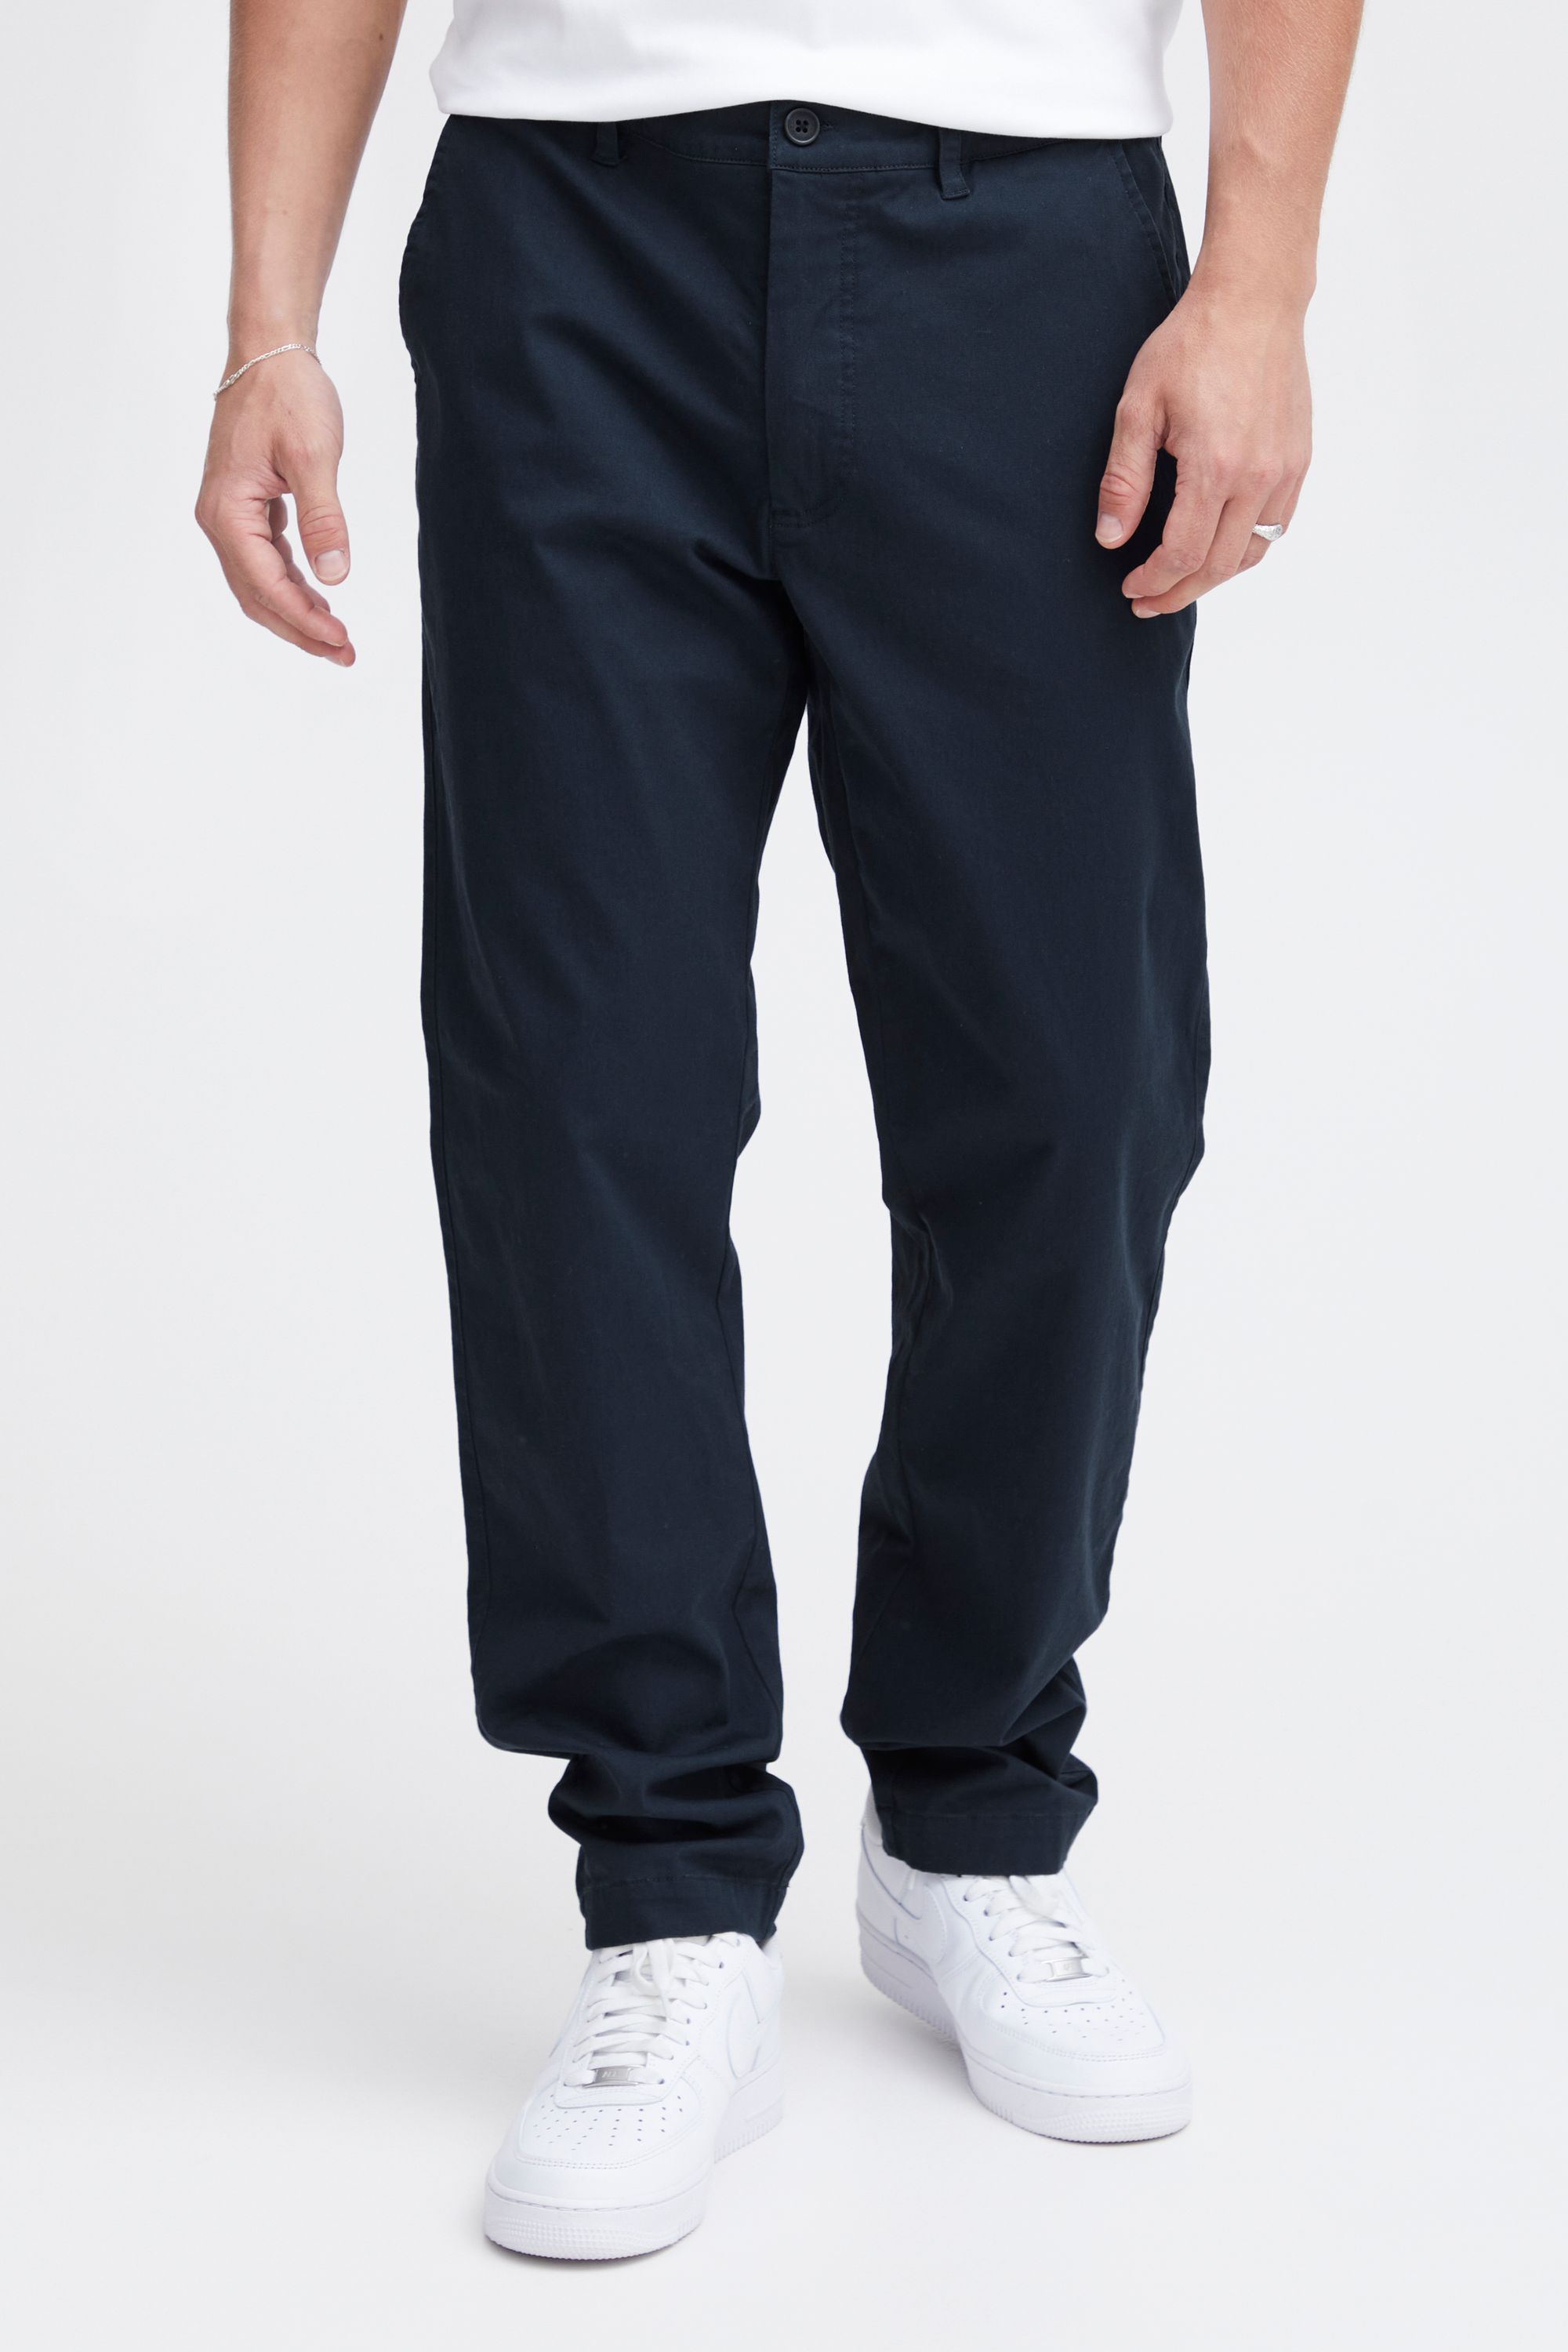 Тканевые брюки !SOLID Chino in, цвет Chinohose in брюки stehmann chinohose fluor цвет blue coral